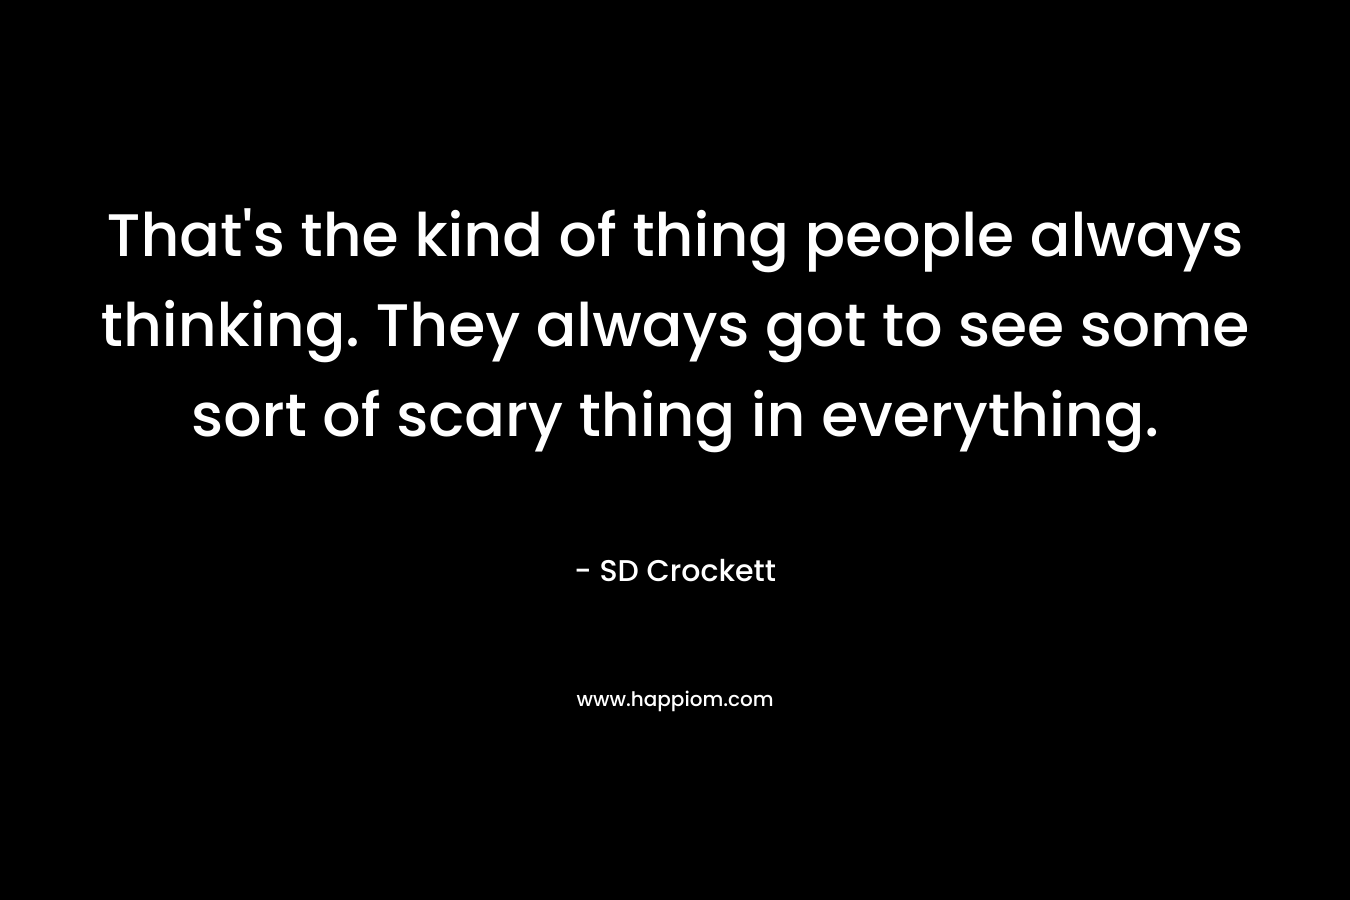 That’s the kind of thing people always thinking. They always got to see some sort of scary thing in everything. – SD Crockett